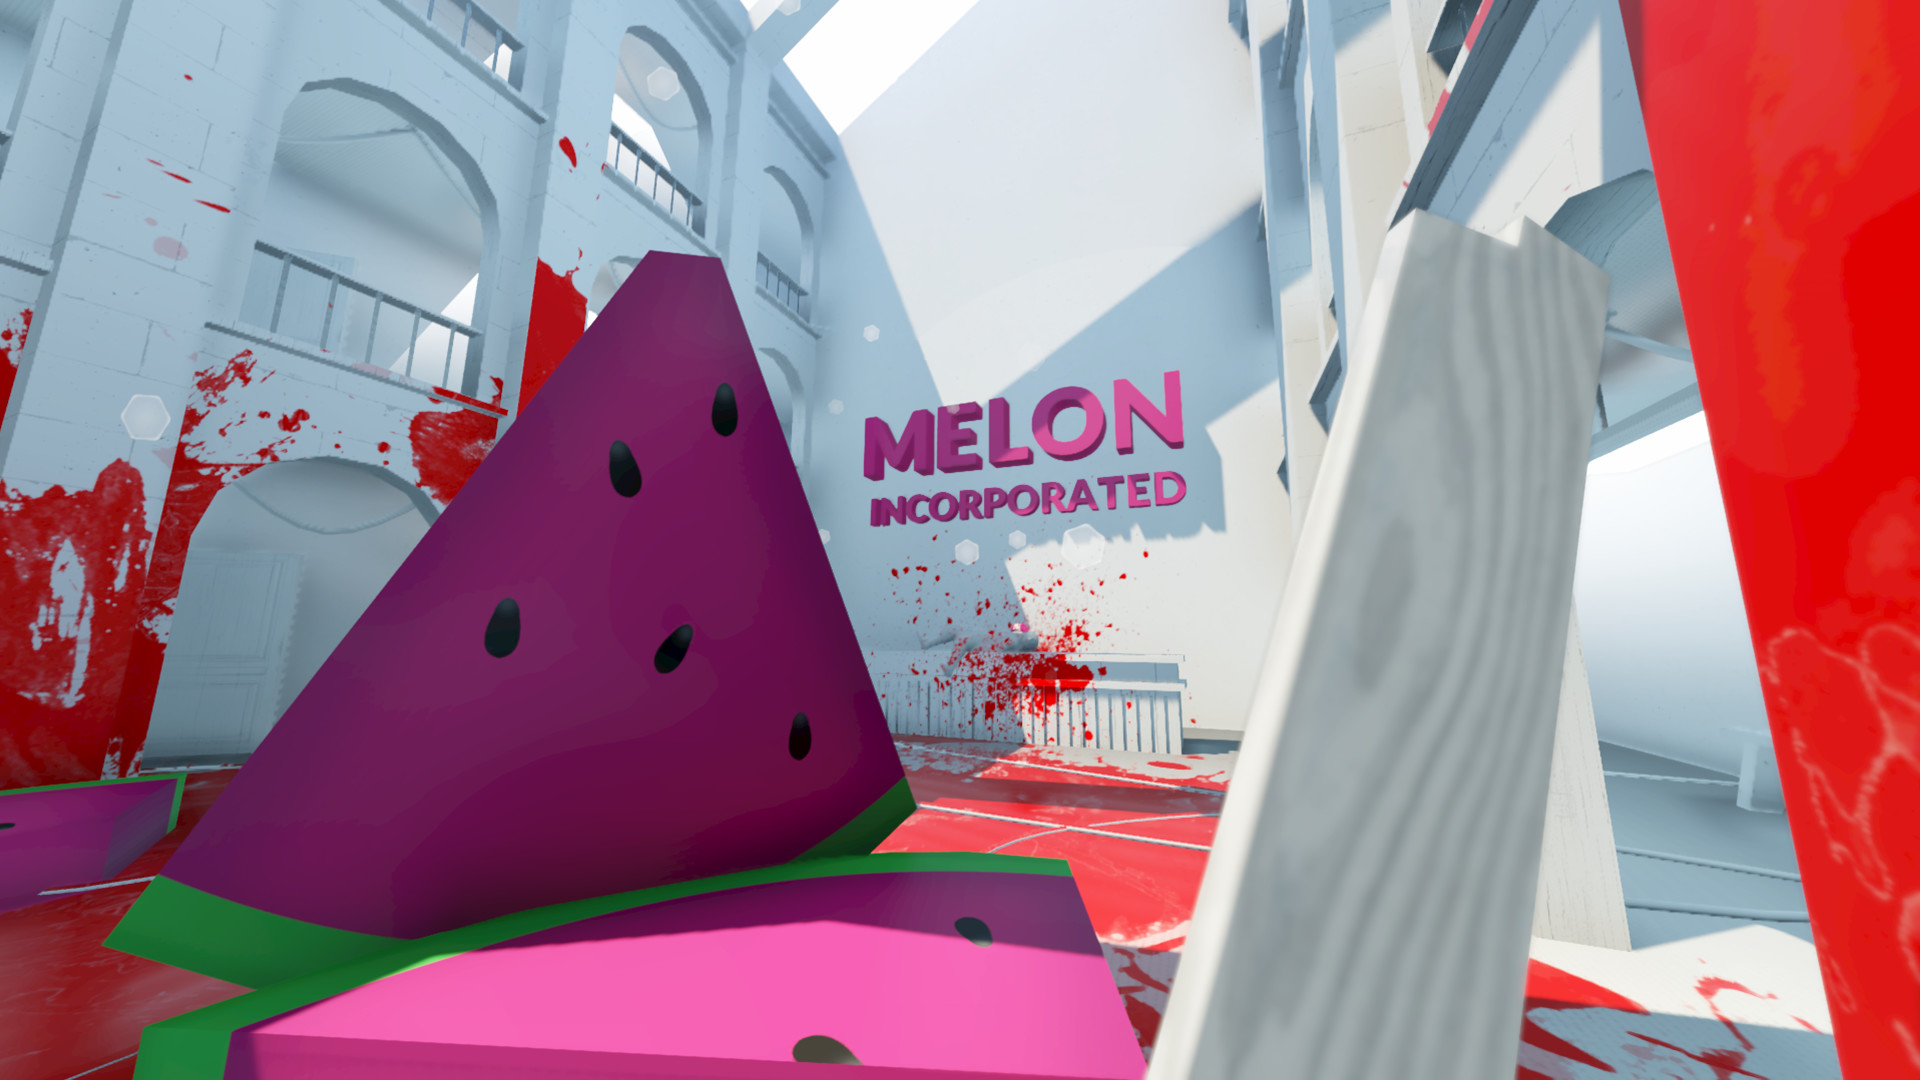 Play Melon Sandbox Online for Free on PC & Mobile